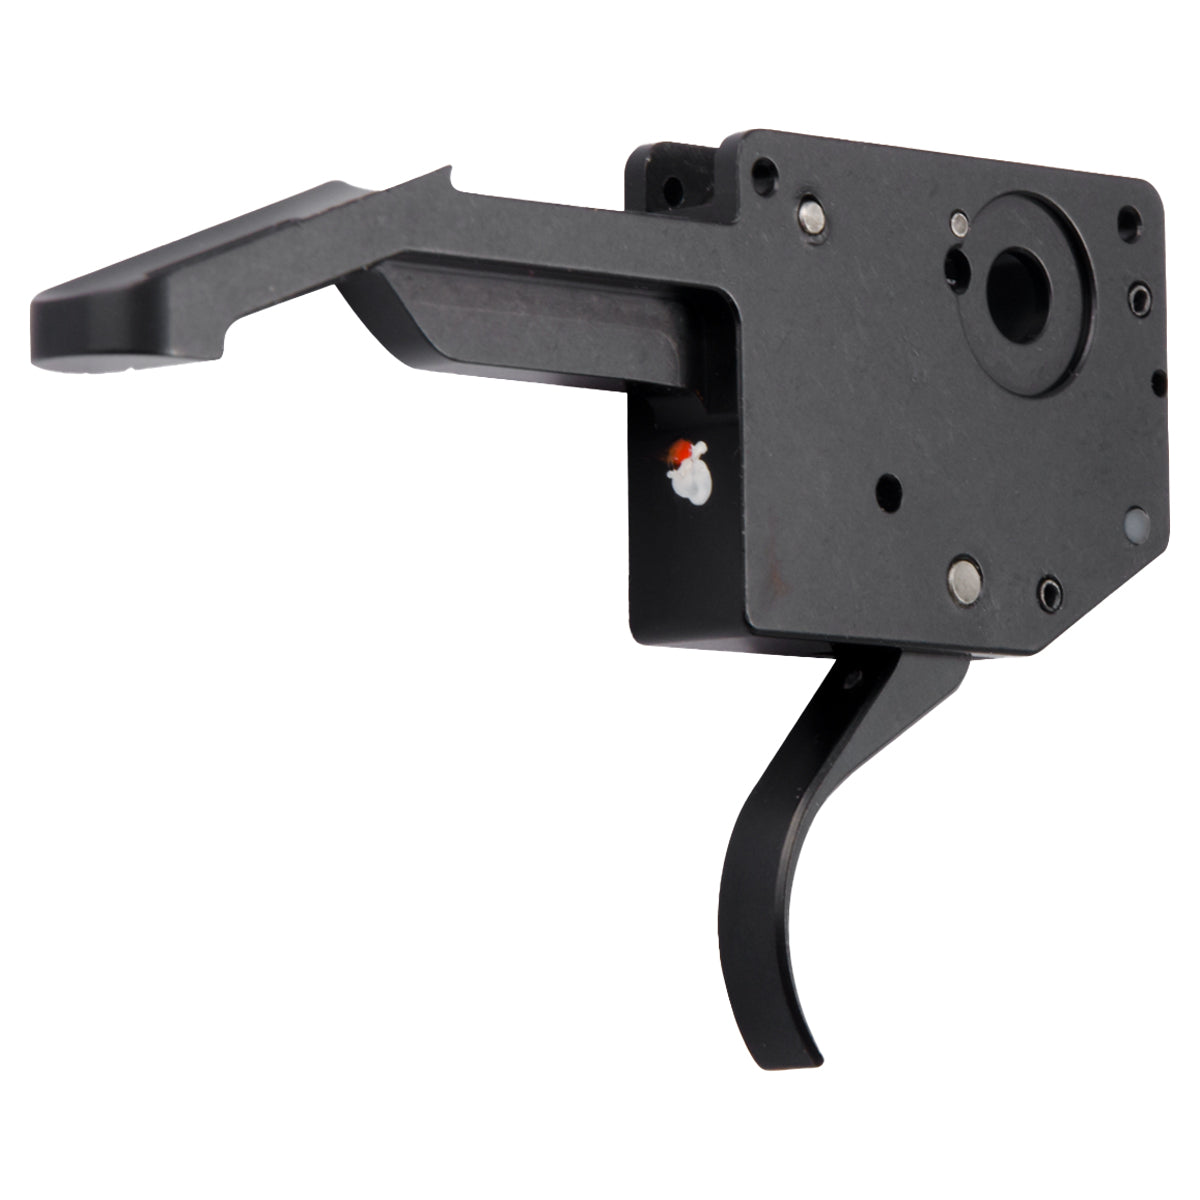 Timney Triggers Ruger American Centerfire Trigger in  by GOHUNT | Timney Triggers - GOHUNT Shop